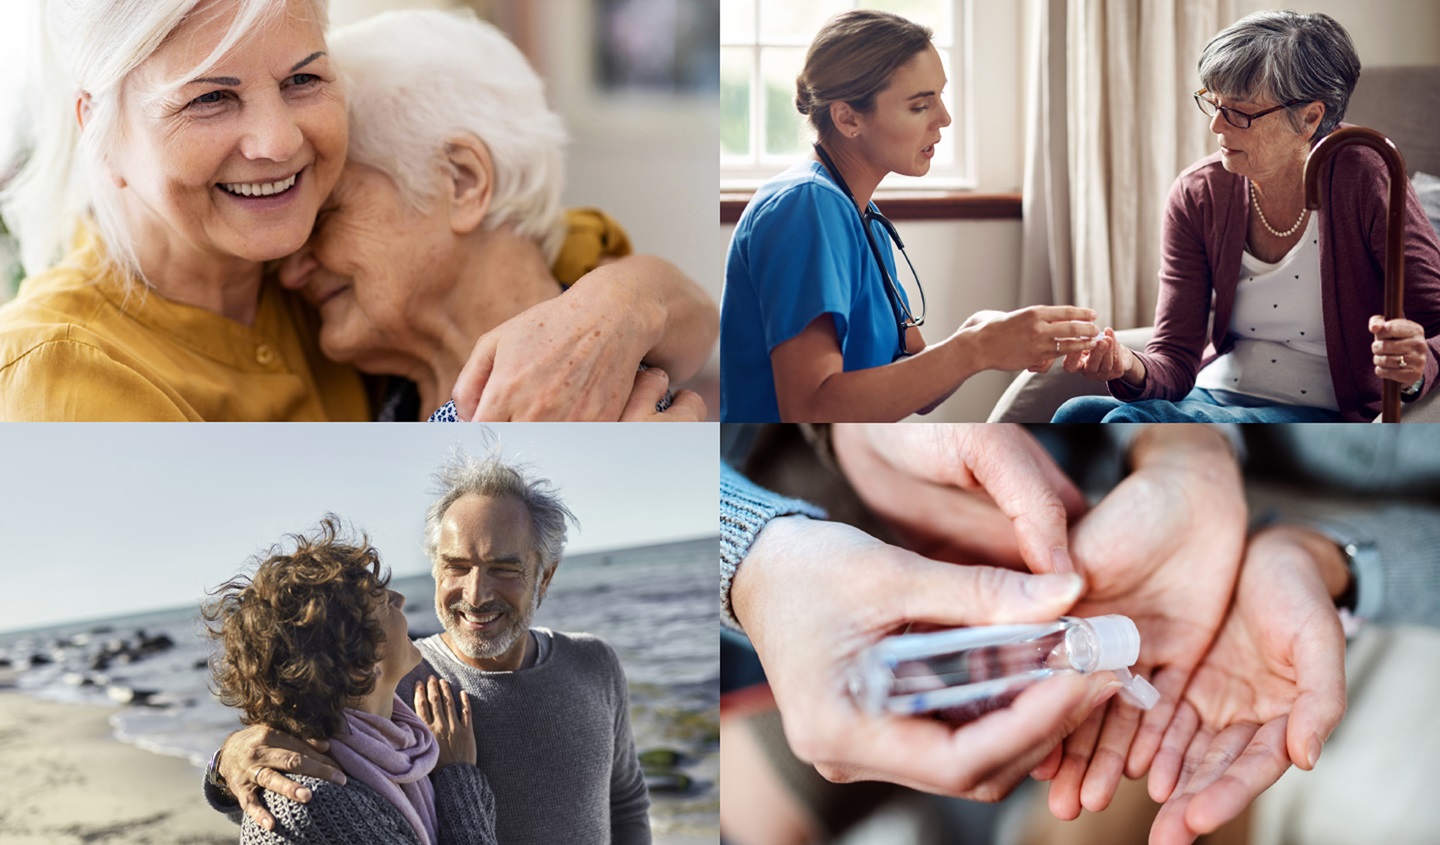 A collage of several images that illustrate the HARTMANN visual language. Happy seniors and care situations are shown.